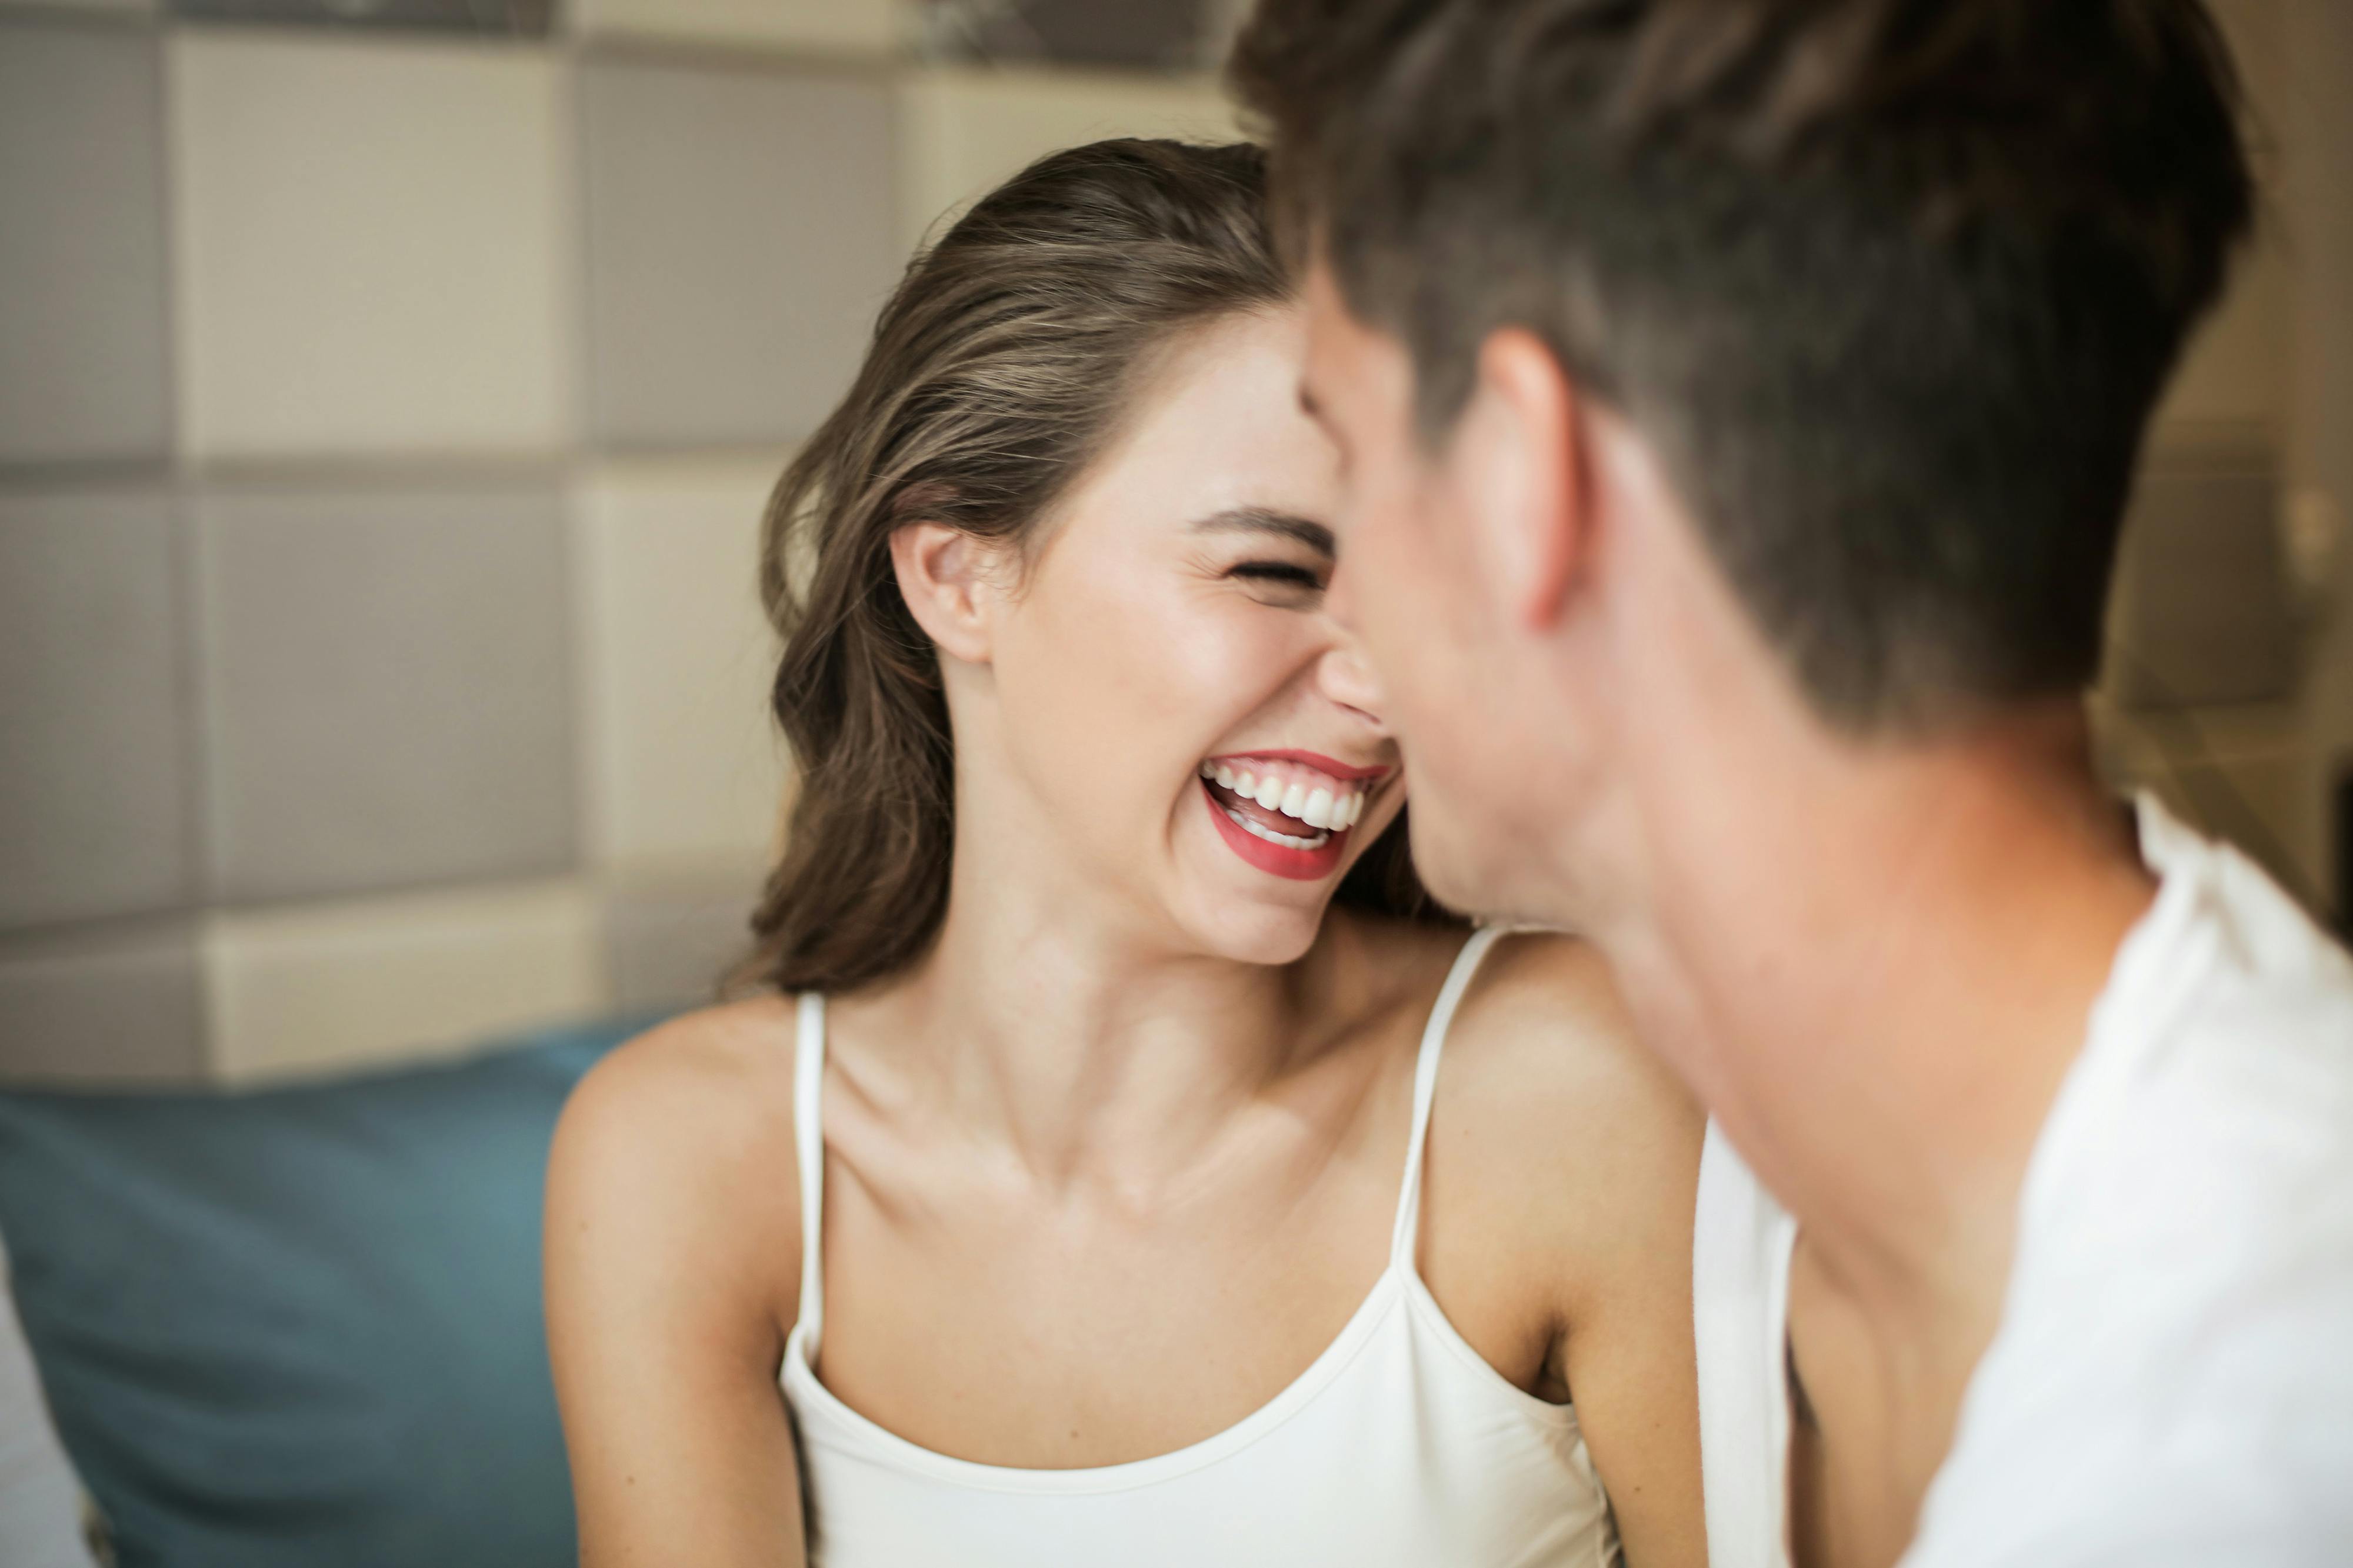 A man and woman talking and laughing | Source: Pexels